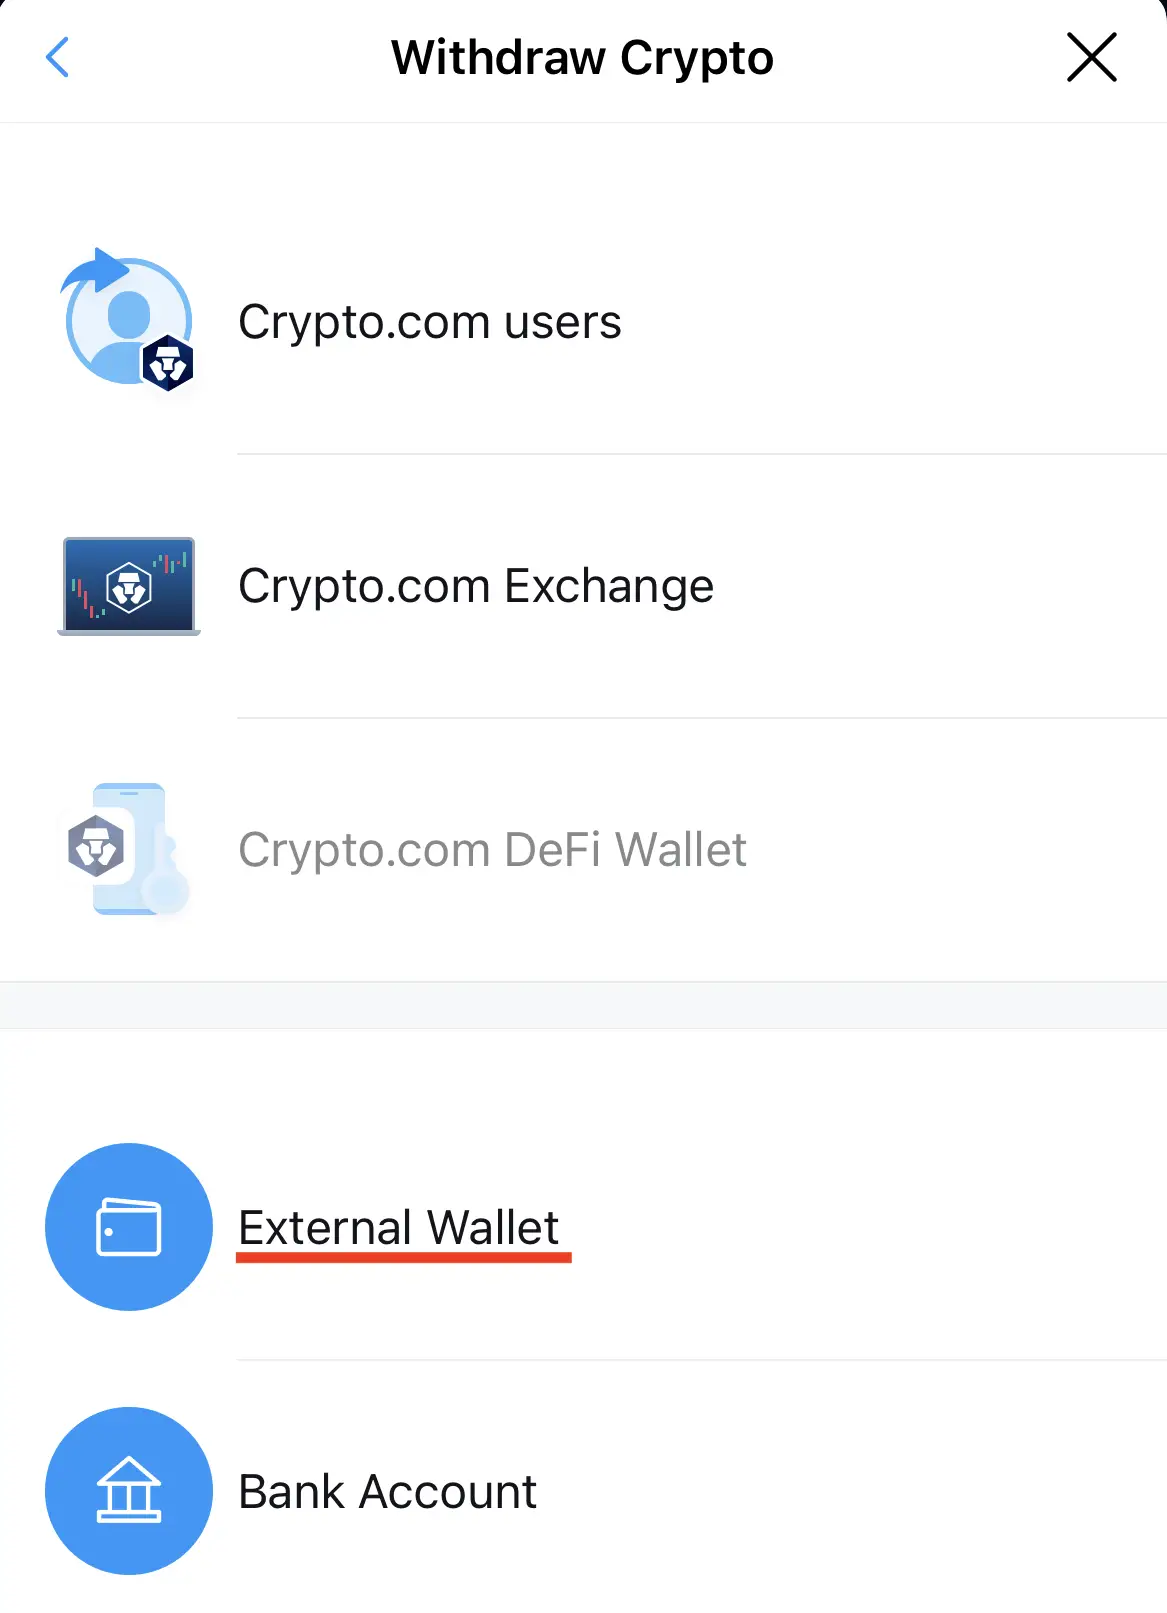 crypto.com withdrawal to external wallet